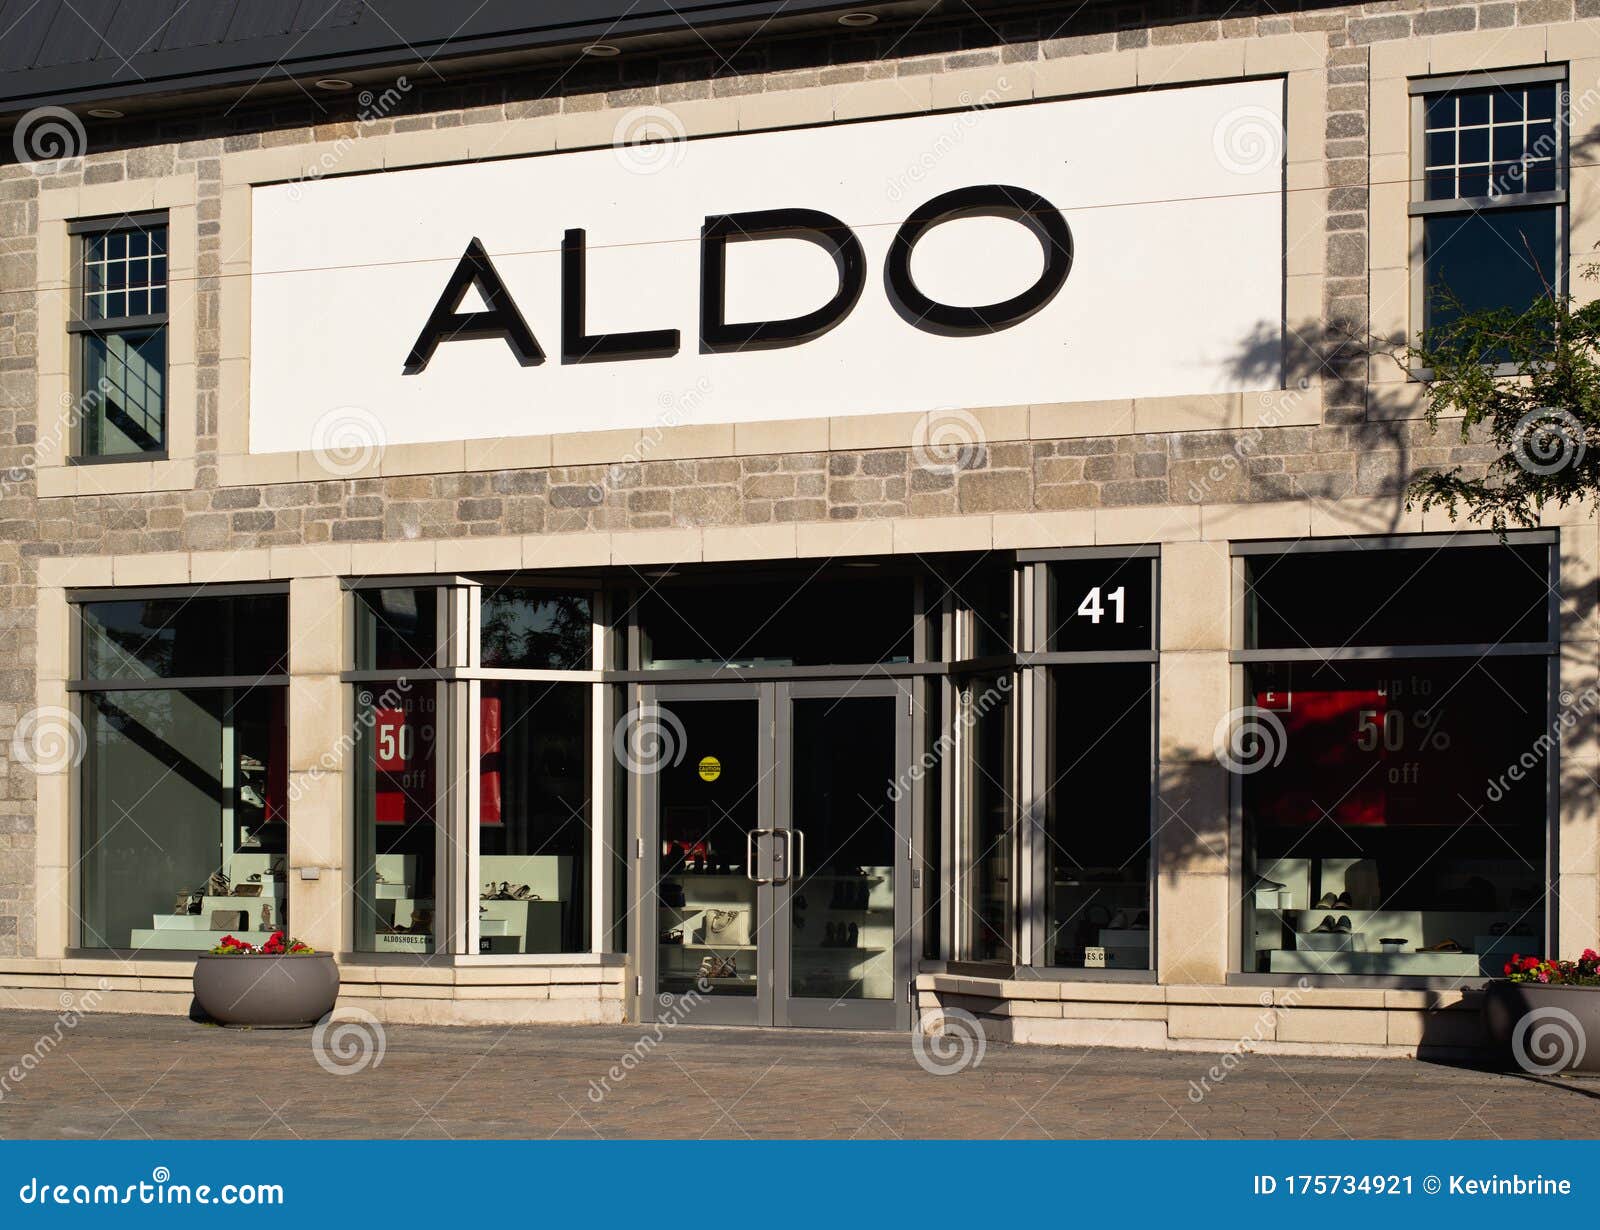 Aldo Shoe - Free & Royalty-Free Stock Photos from Dreamstime